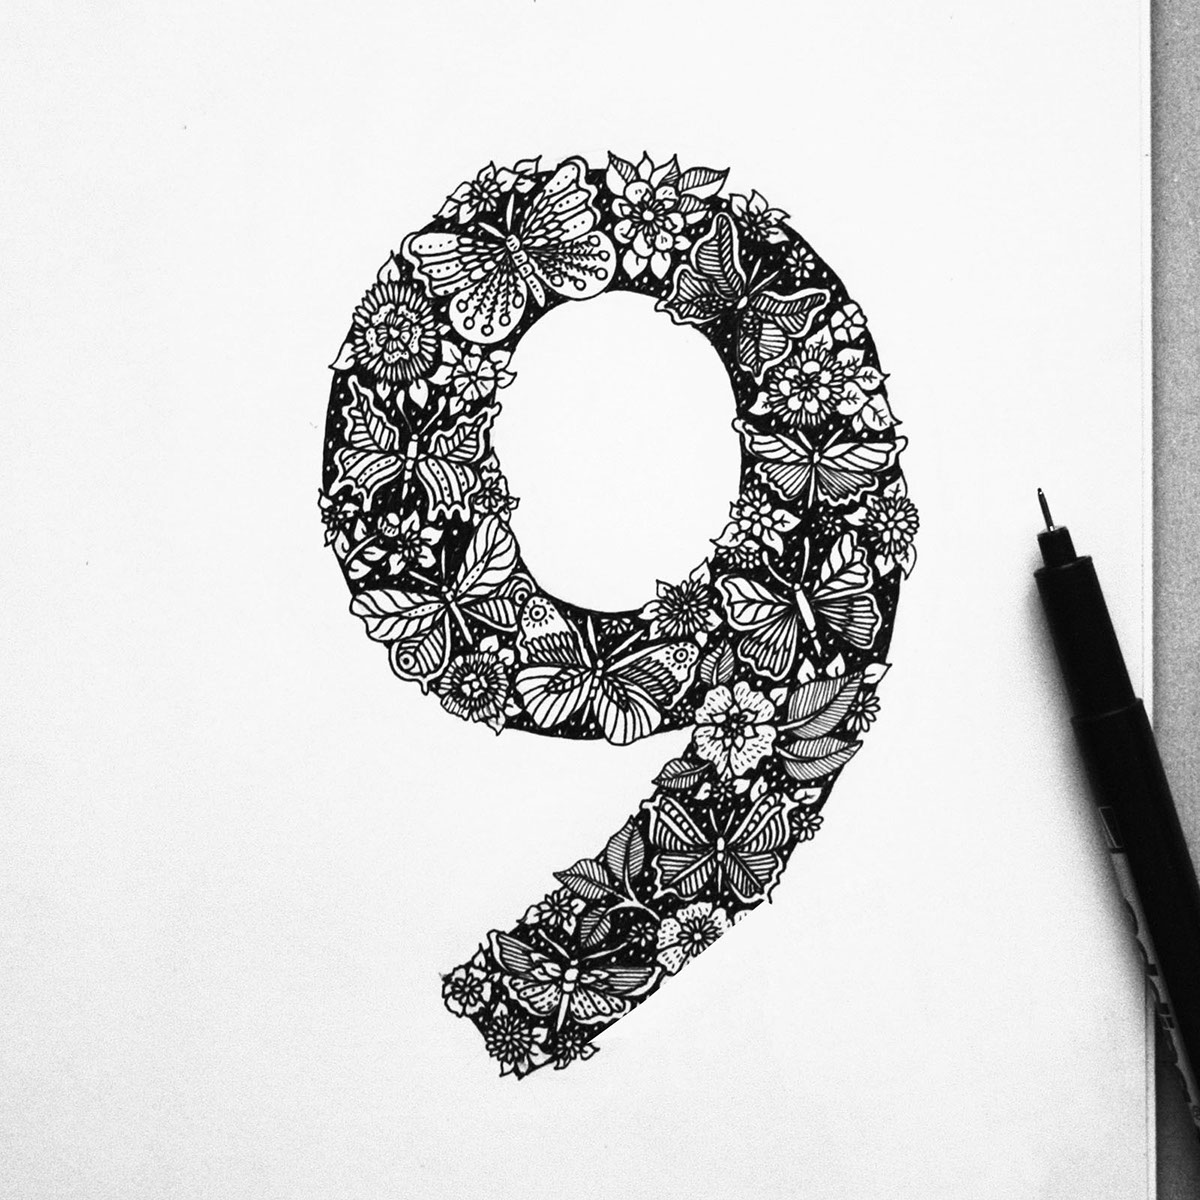 numbers 36daysoftype type letters Numerals graphic draw illustrate handmade handdrawn pen ink sketch doodle black and white